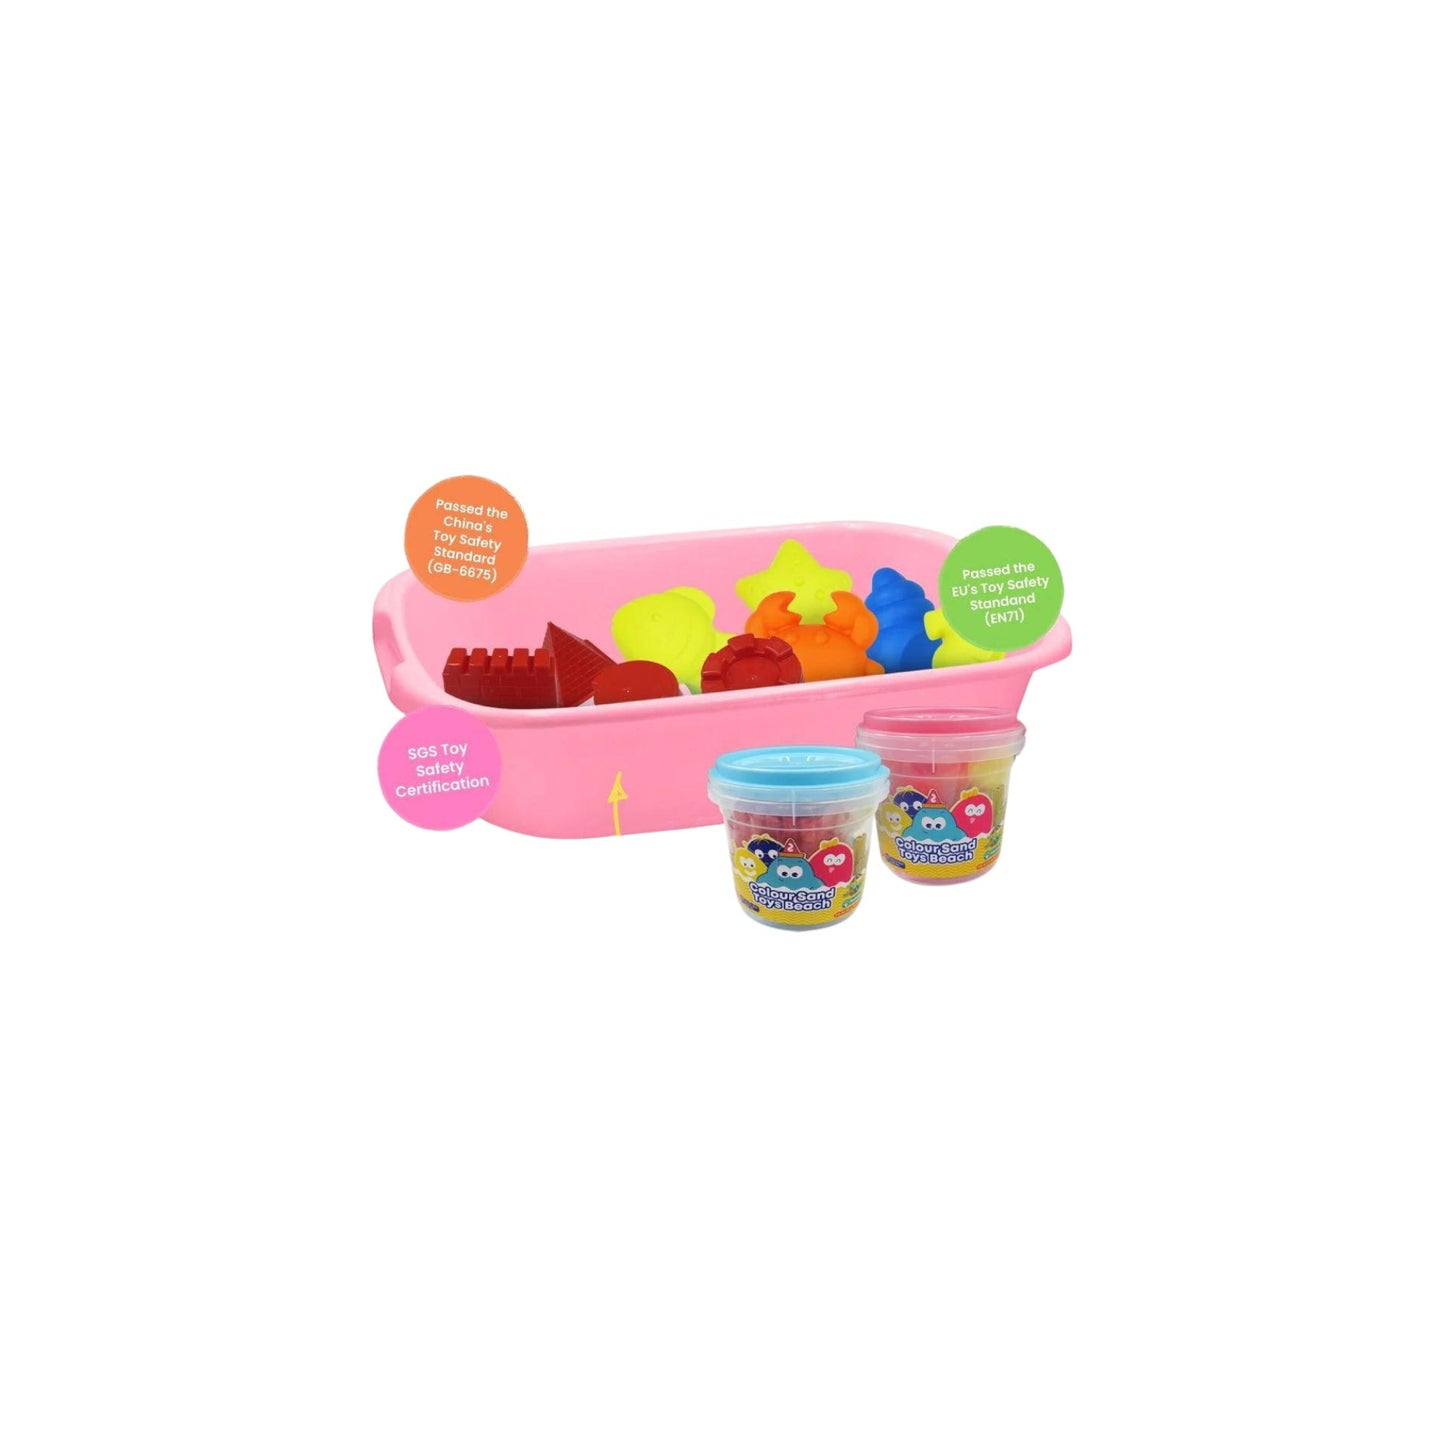 Cottontail Kinetic Motion Sand Toy Kit I Non Toxic Safe for Kids Hypoallergenic Easy Clean and Does not leave residue on hands